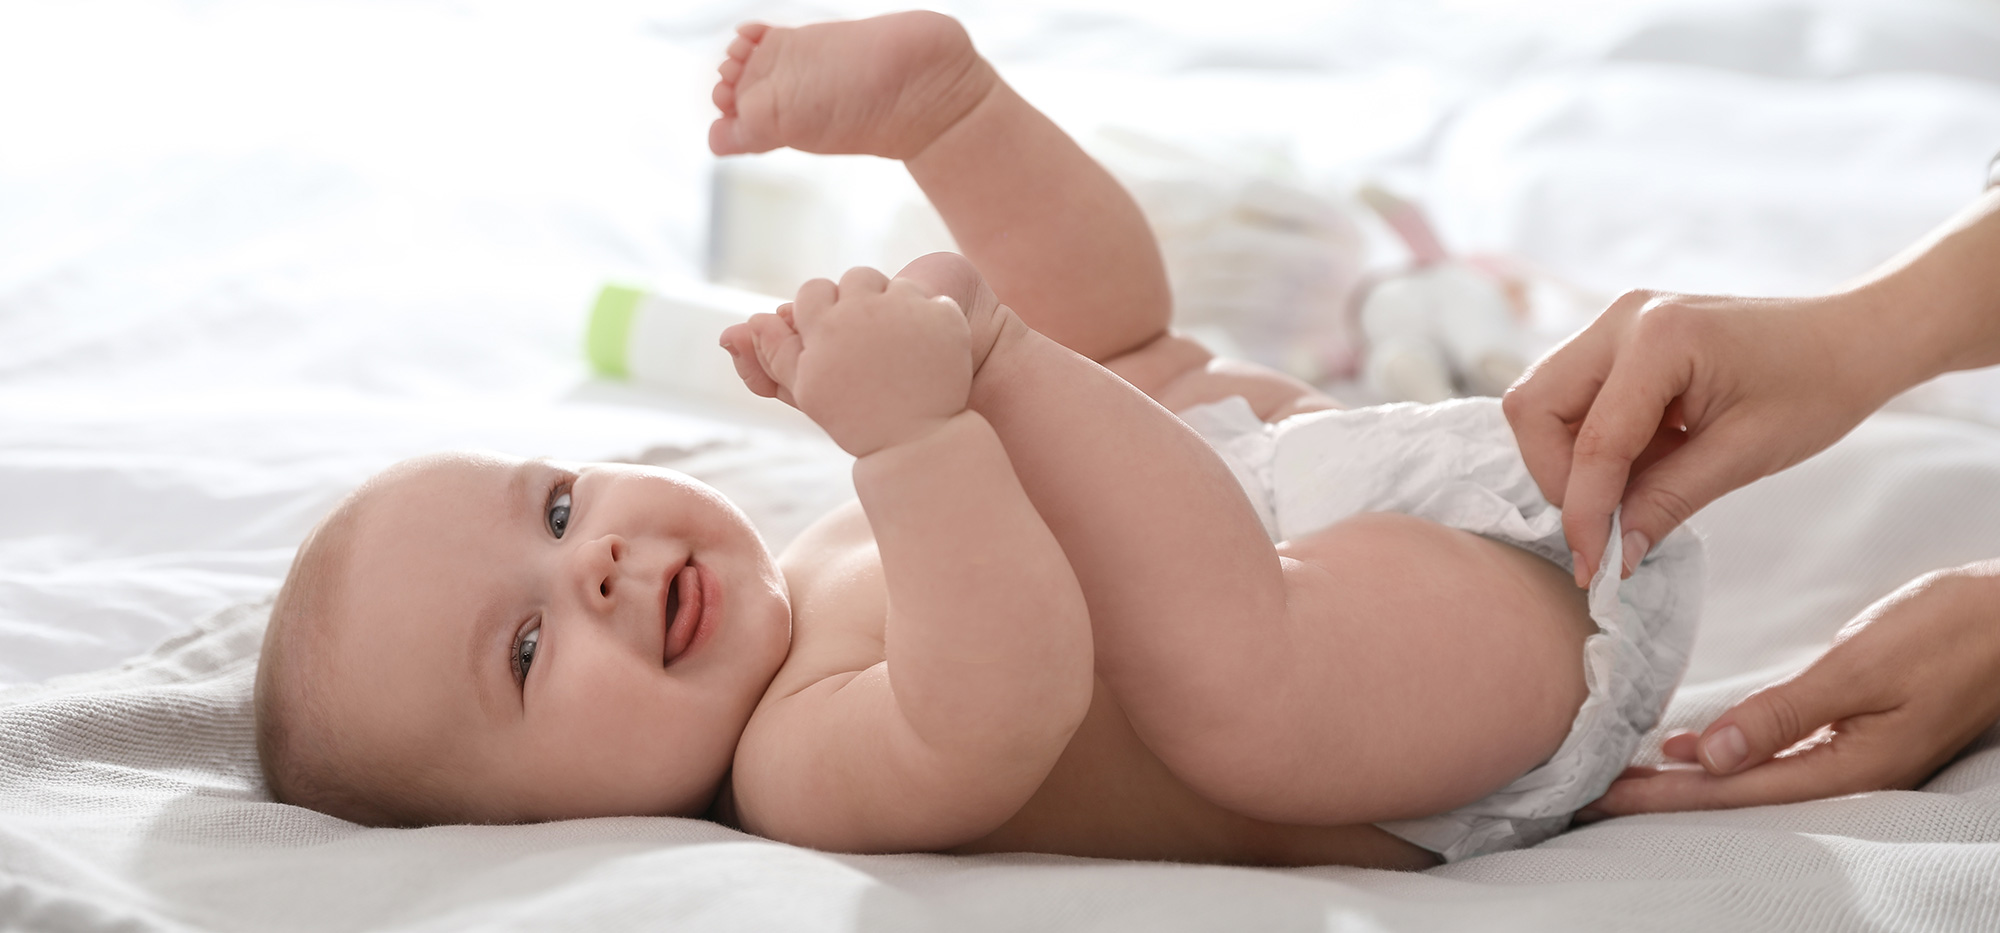 Everything you need to know about your child’s diaper